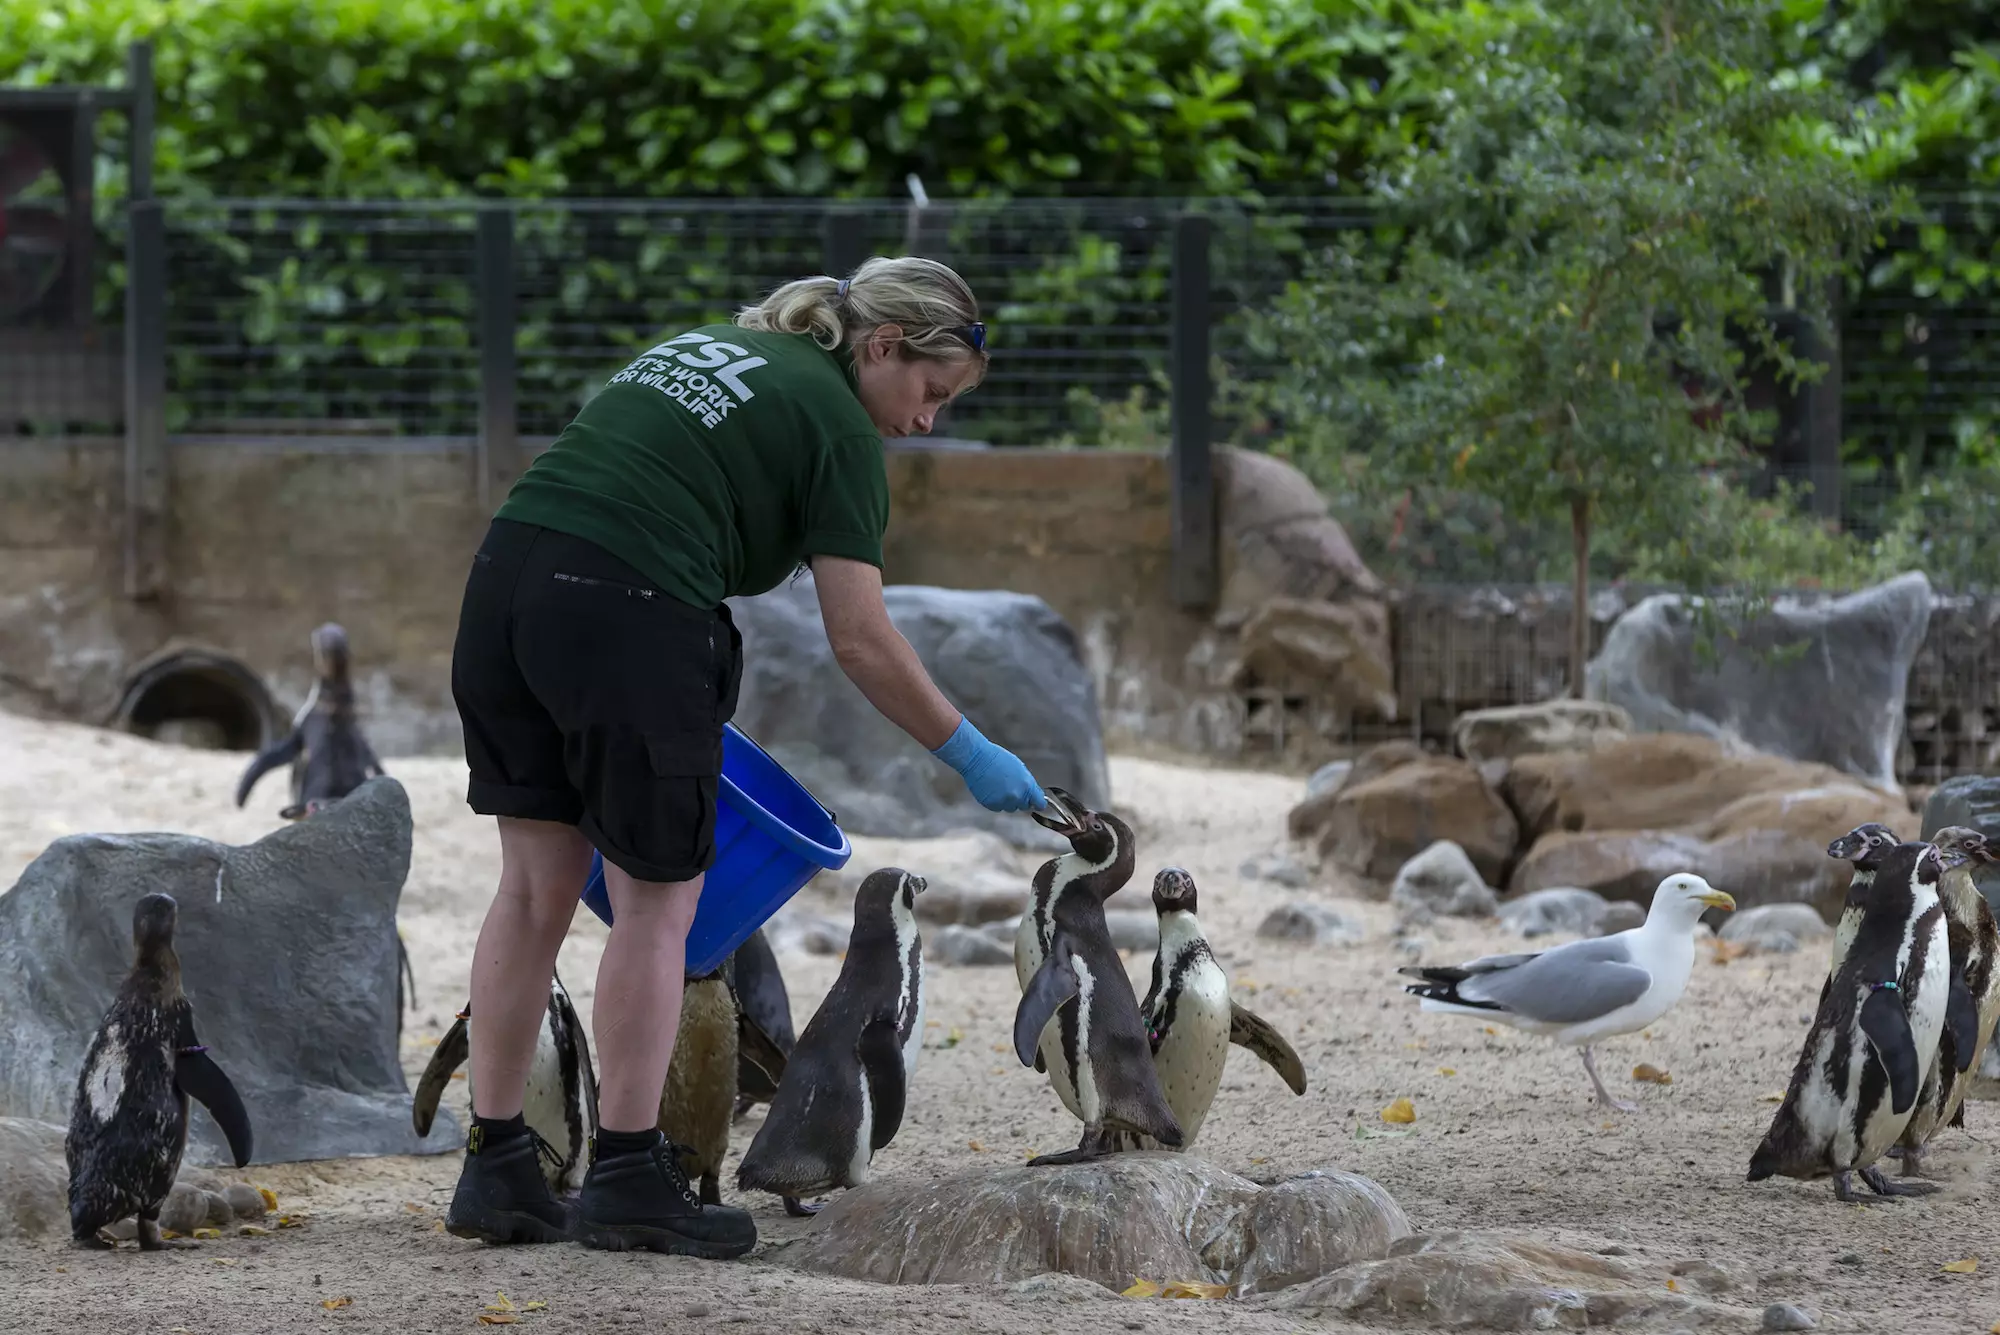 London Zoo is home to over 18,000 animals, with the monthly food bill clocking in at around £43,500 (